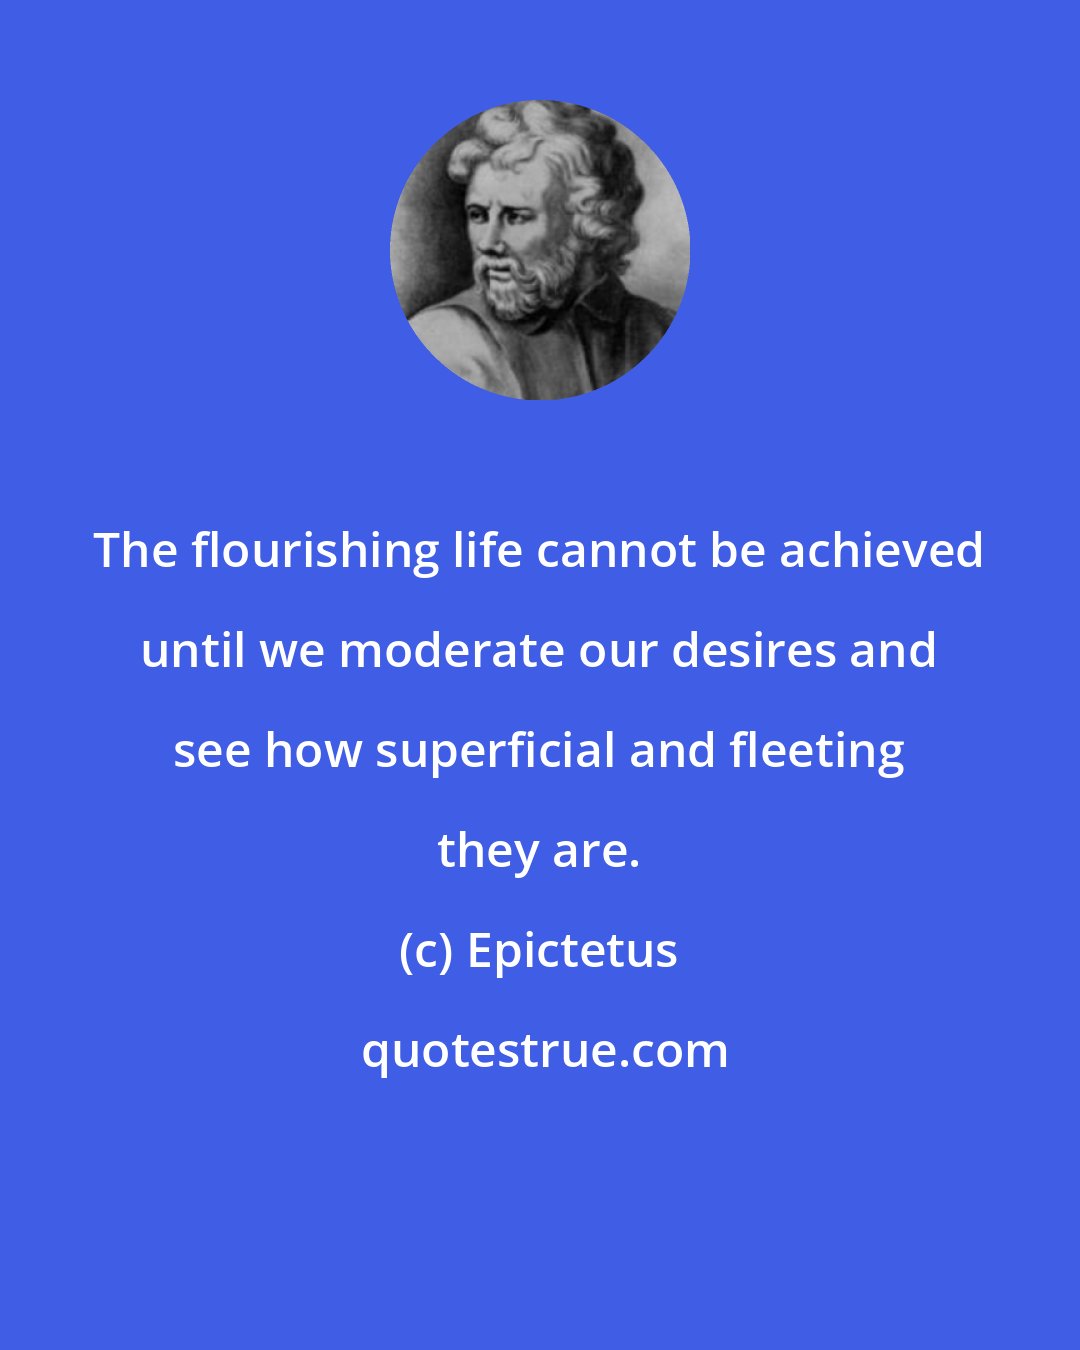 Epictetus: The flourishing life cannot be achieved until we moderate our desires and see how superficial and fleeting they are.